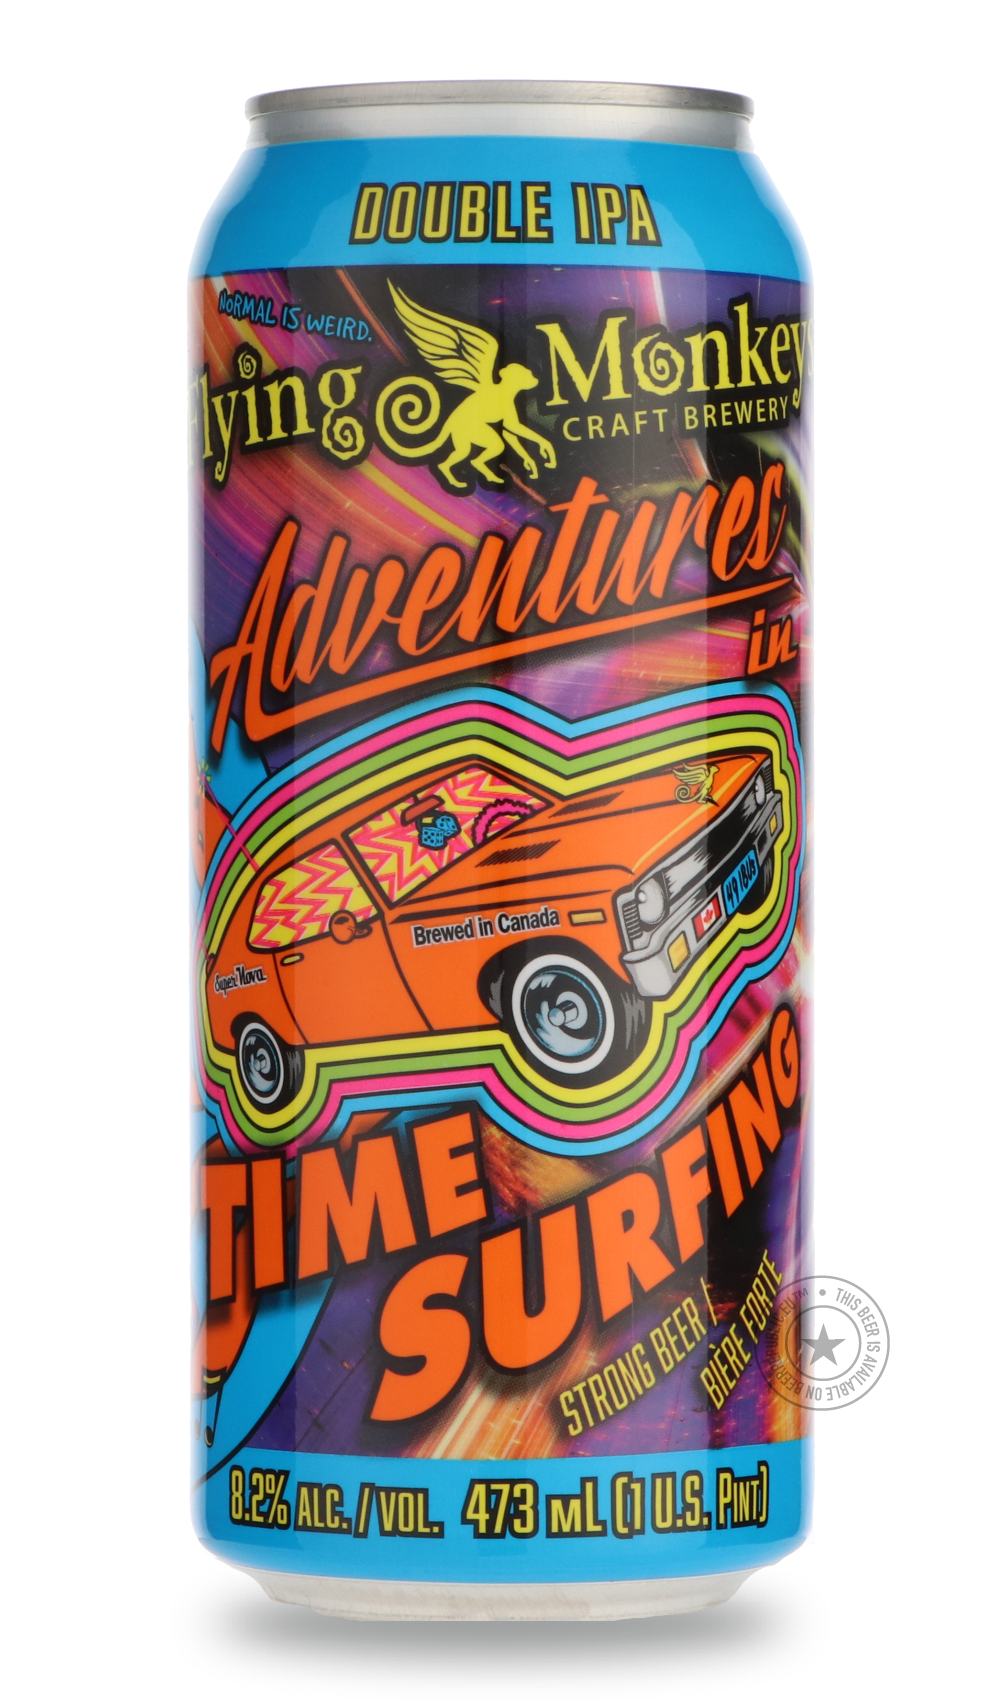 -Flying Monkeys- Adventures In Time Surfing-IPA- Only @ Beer Republic - The best online beer store for American & Canadian craft beer - Buy beer online from the USA and Canada - Bier online kopen - Amerikaans bier kopen - Craft beer store - Craft beer kopen - Amerikanisch bier kaufen - Bier online kaufen - Acheter biere online - IPA - Stout - Porter - New England IPA - Hazy IPA - Imperial Stout - Barrel Aged - Barrel Aged Imperial Stout - Brown - Dark beer - Blond - Blonde - Pilsner - Lager - Wheat - Weizen